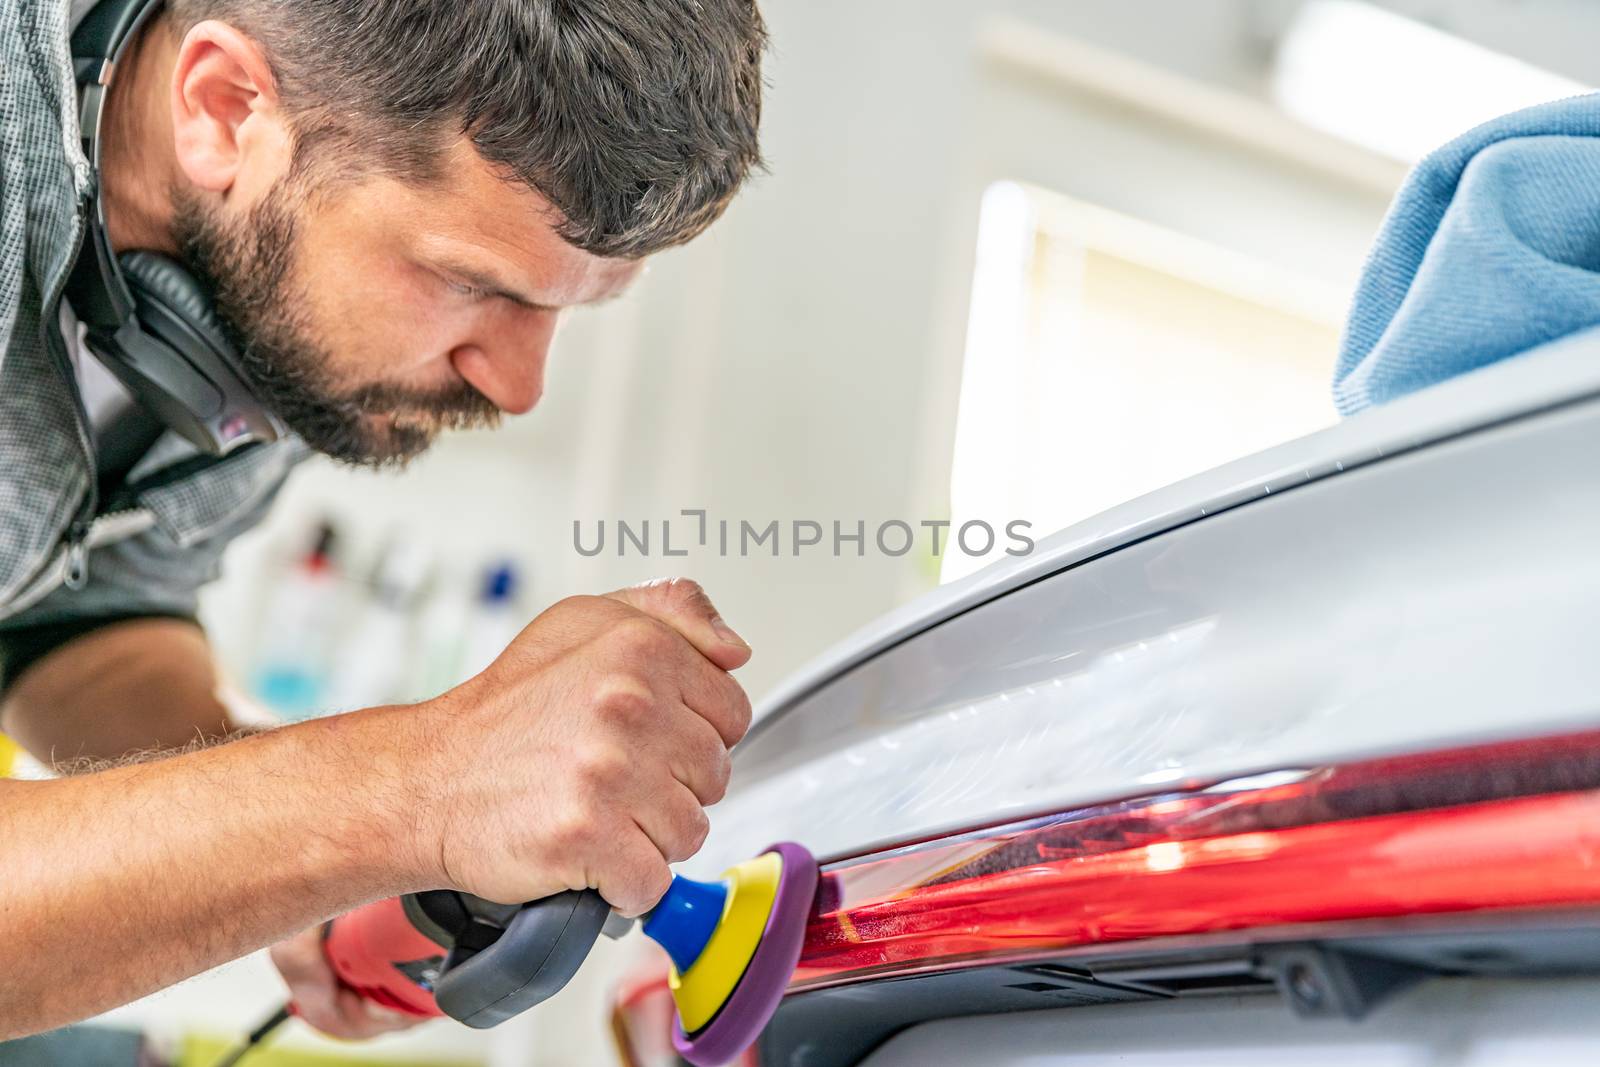 shine restoration and repair of scratches on car taillights with the help of polishing.